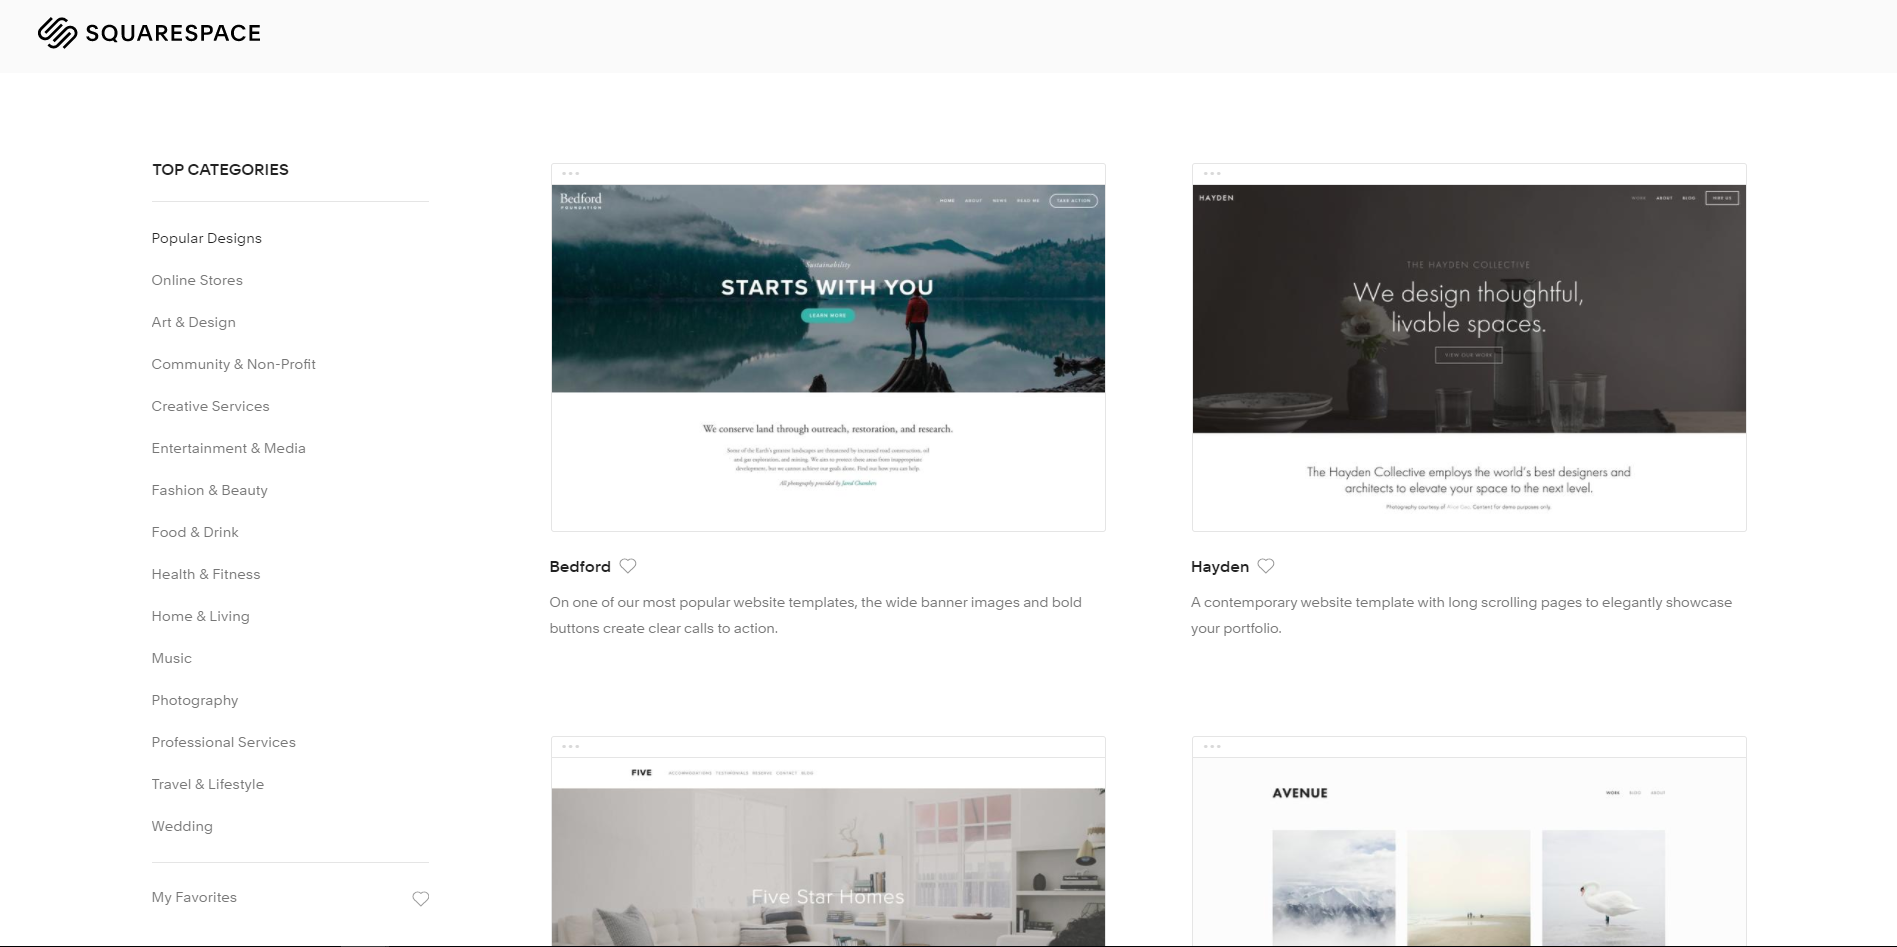 How many templates does Squarespace offer to help build your website.